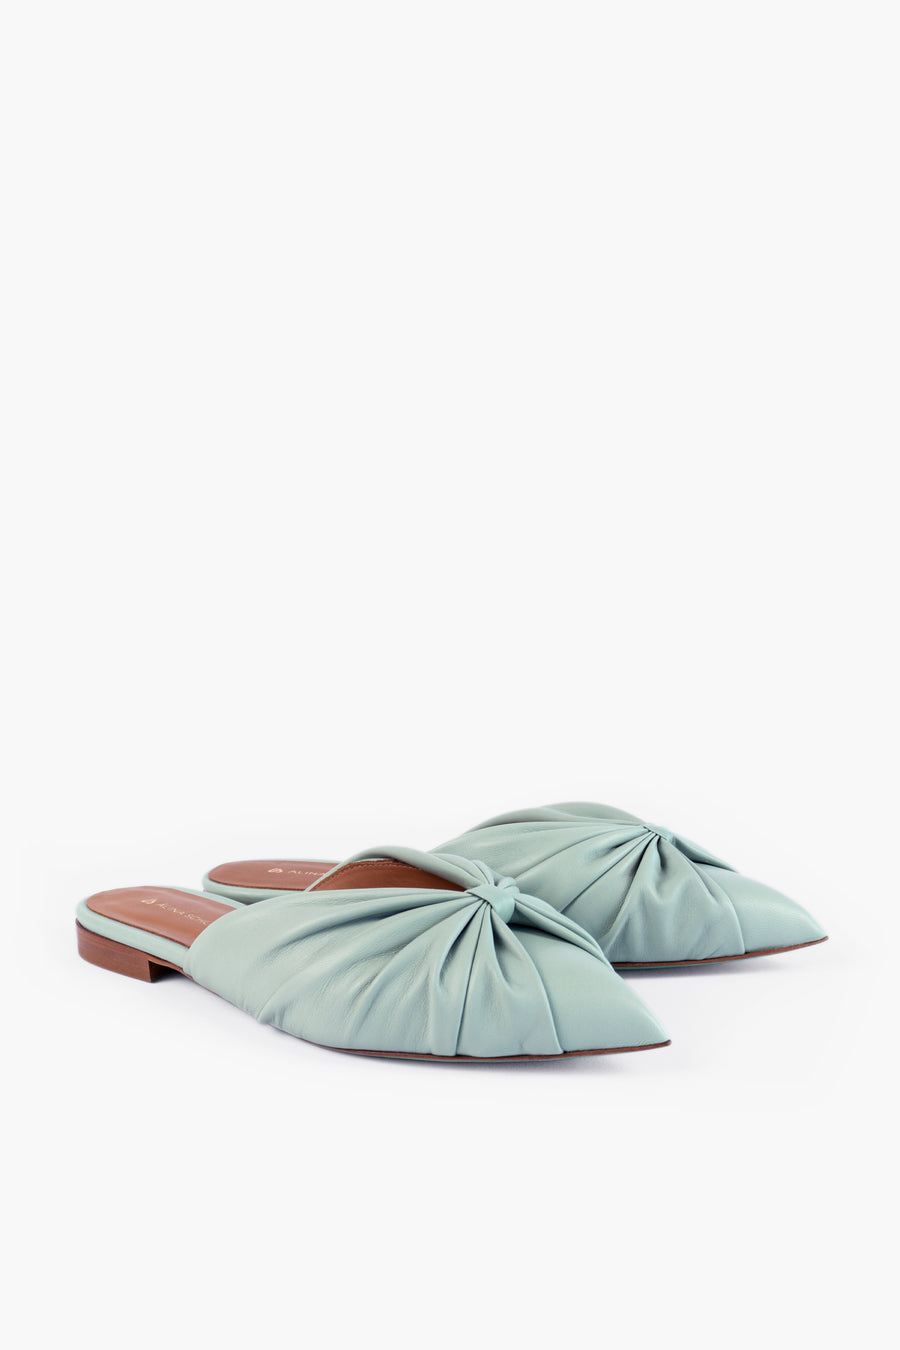 Sustainable, mint coloured TILDA slippers with plissee, locally produced in Hamburg. Made from metal-free leather. Made in Germany by Alina Schürfeld.